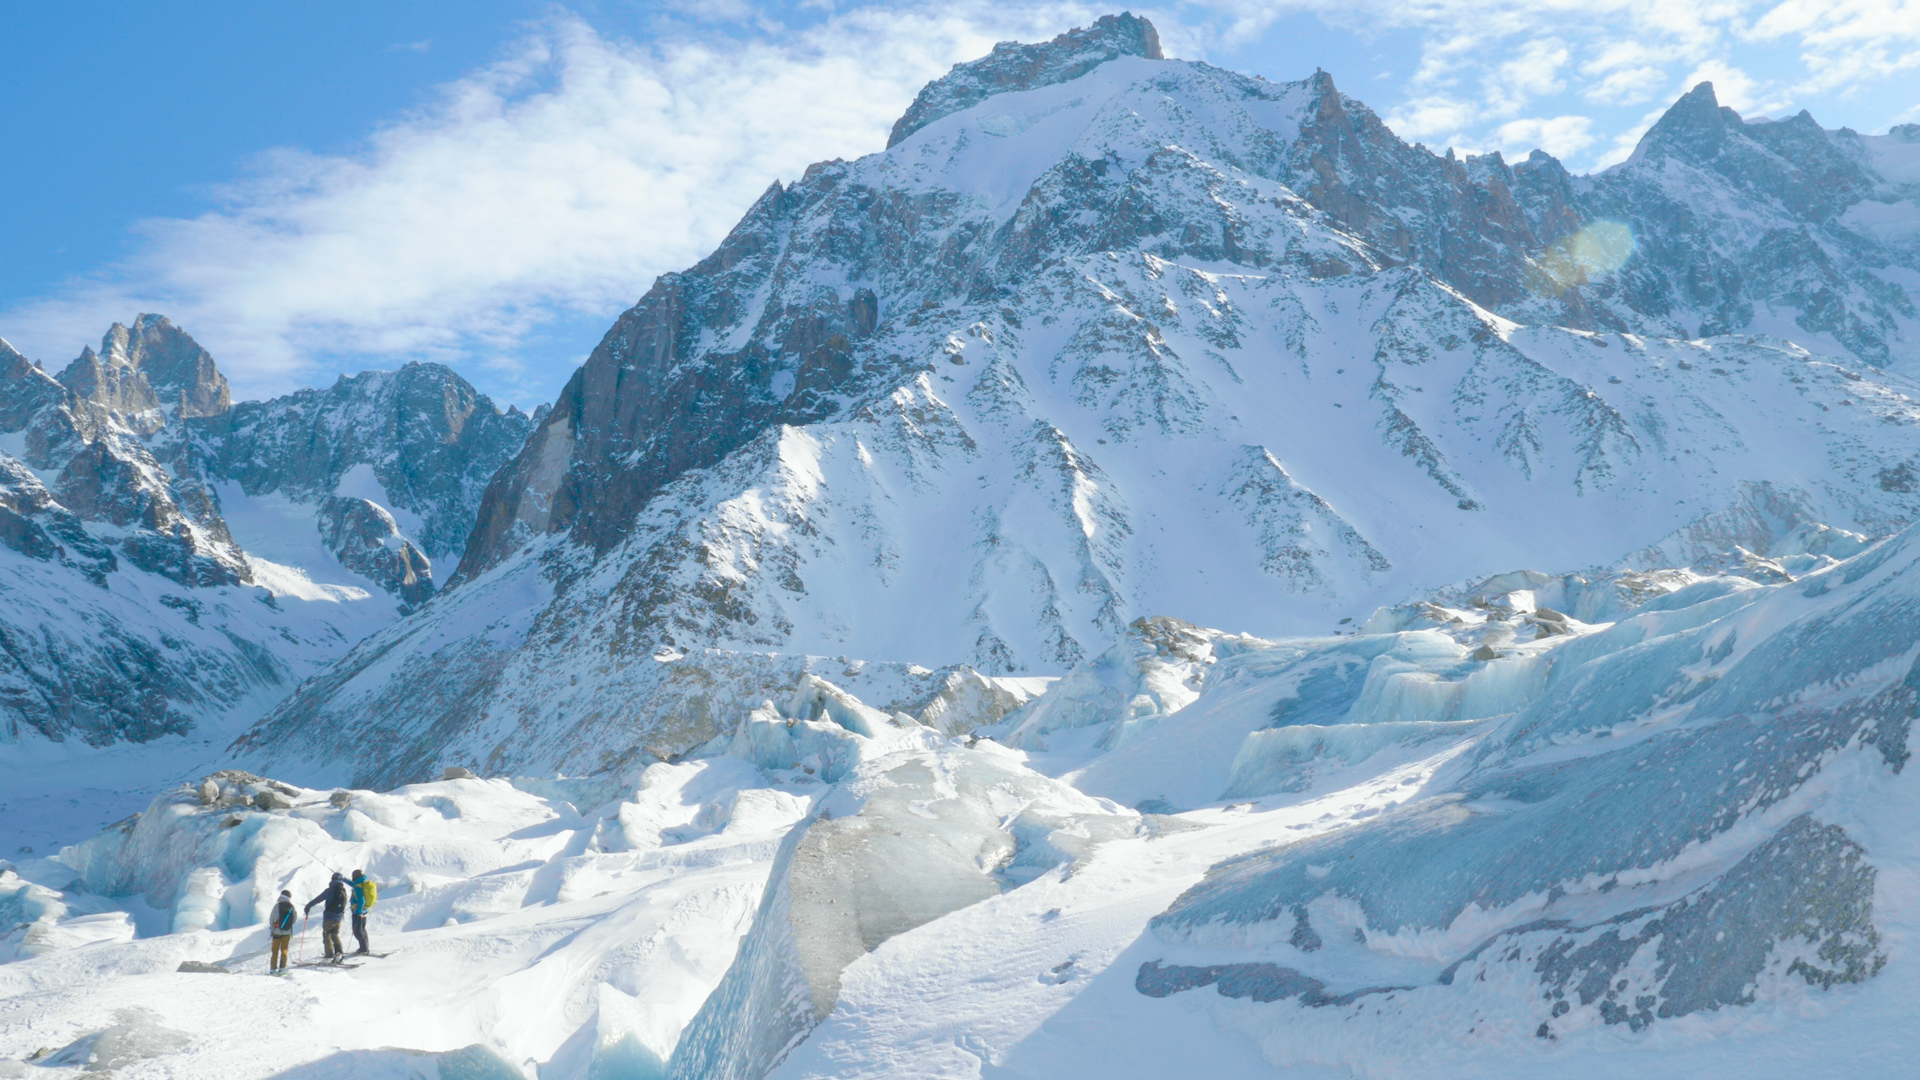 A view of three skiers admiring glaciers and seracs in Chamonix's Vallee Blanche